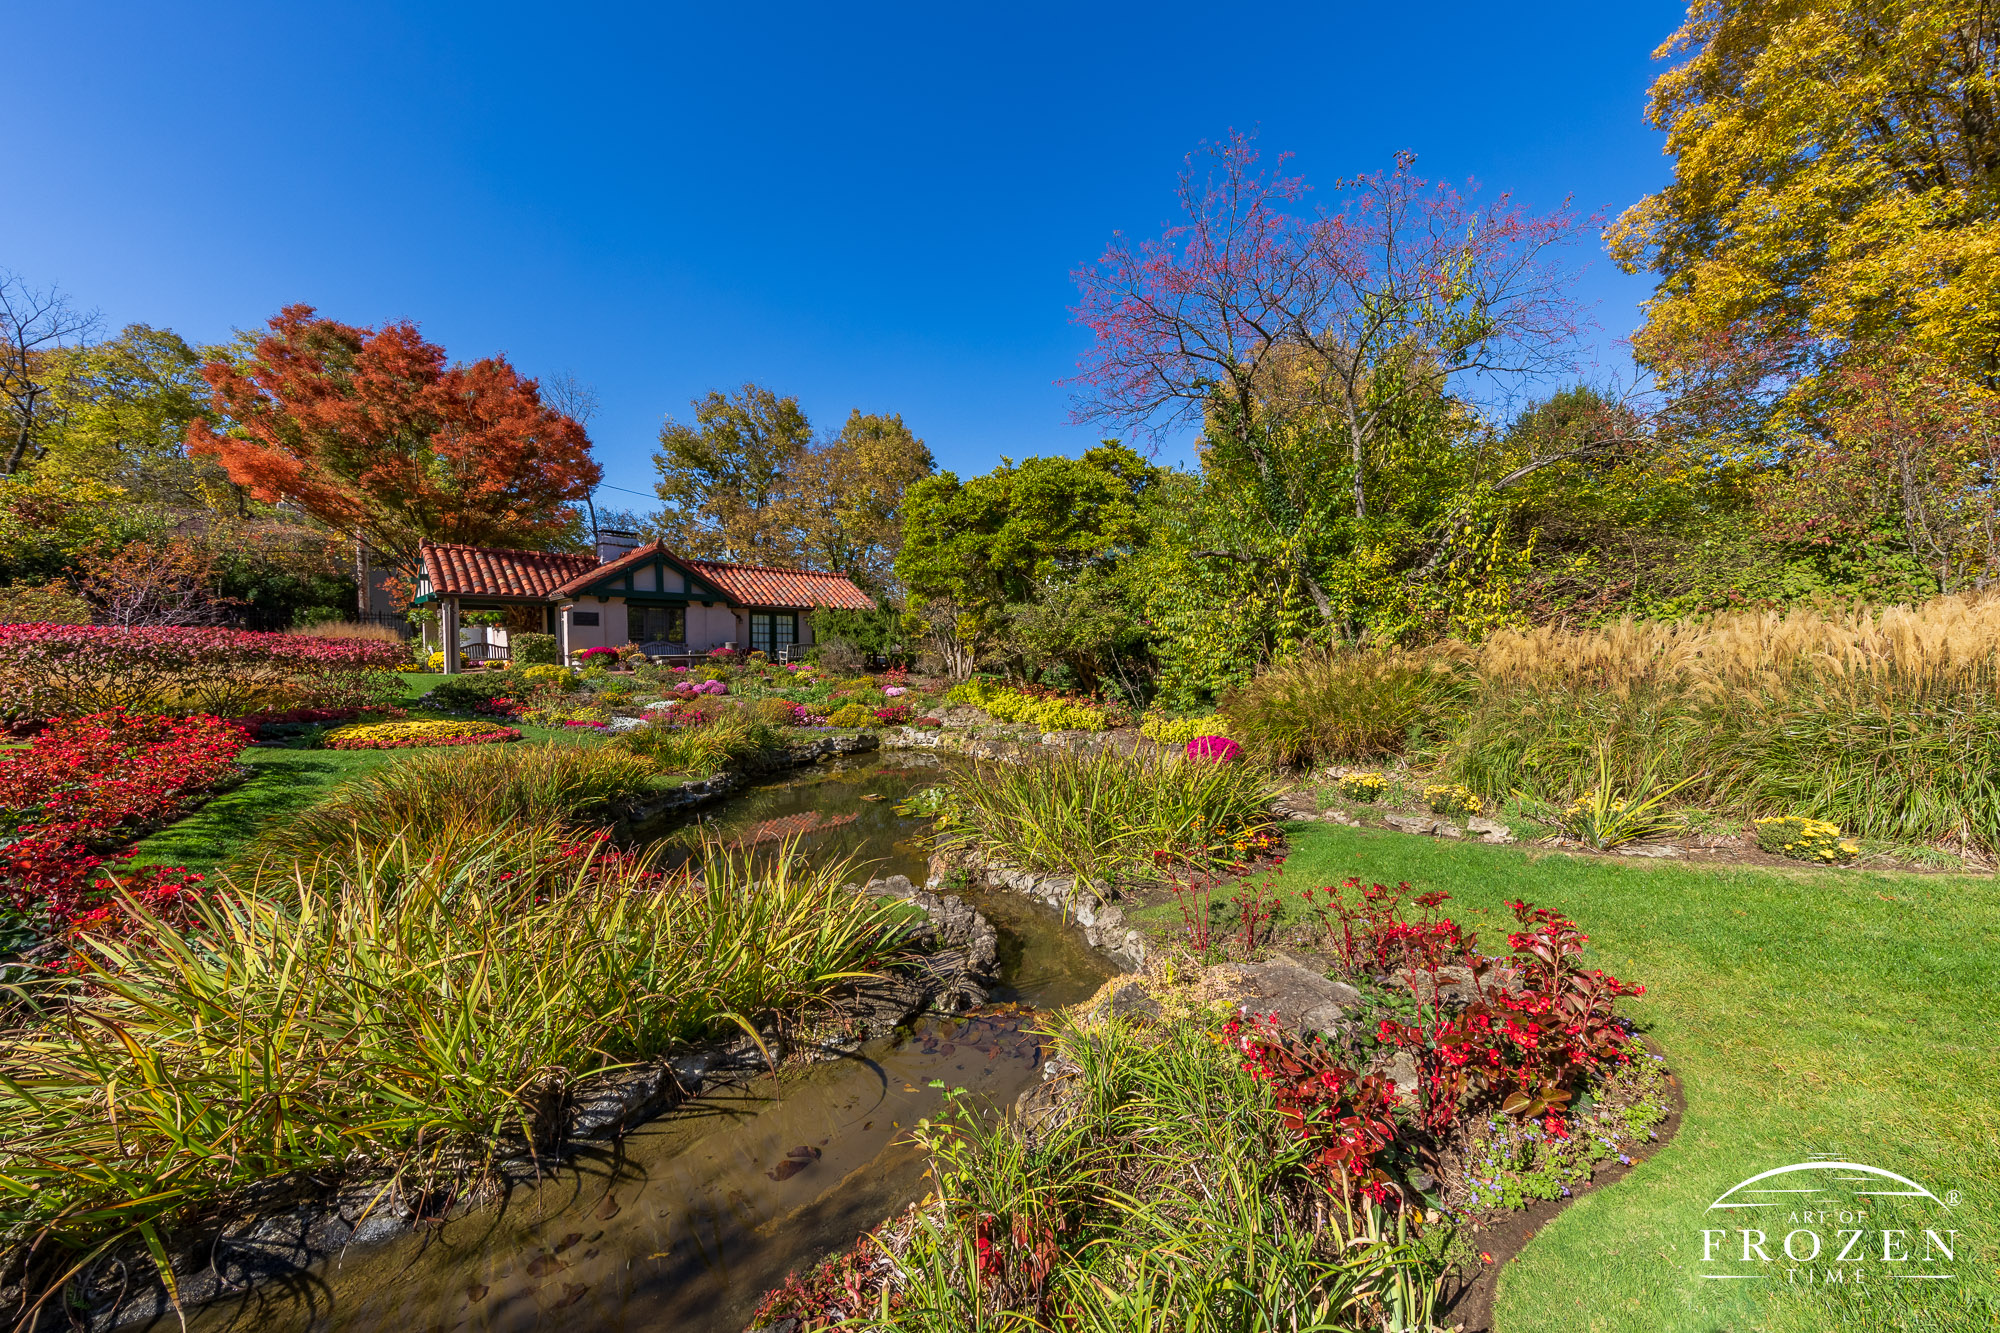 Under burning autumn blue skies, the Smith Memorial Gardens offers a visual wonder with the trees transiting from green to orange and the rich colored vegetation surrounding the garden pond